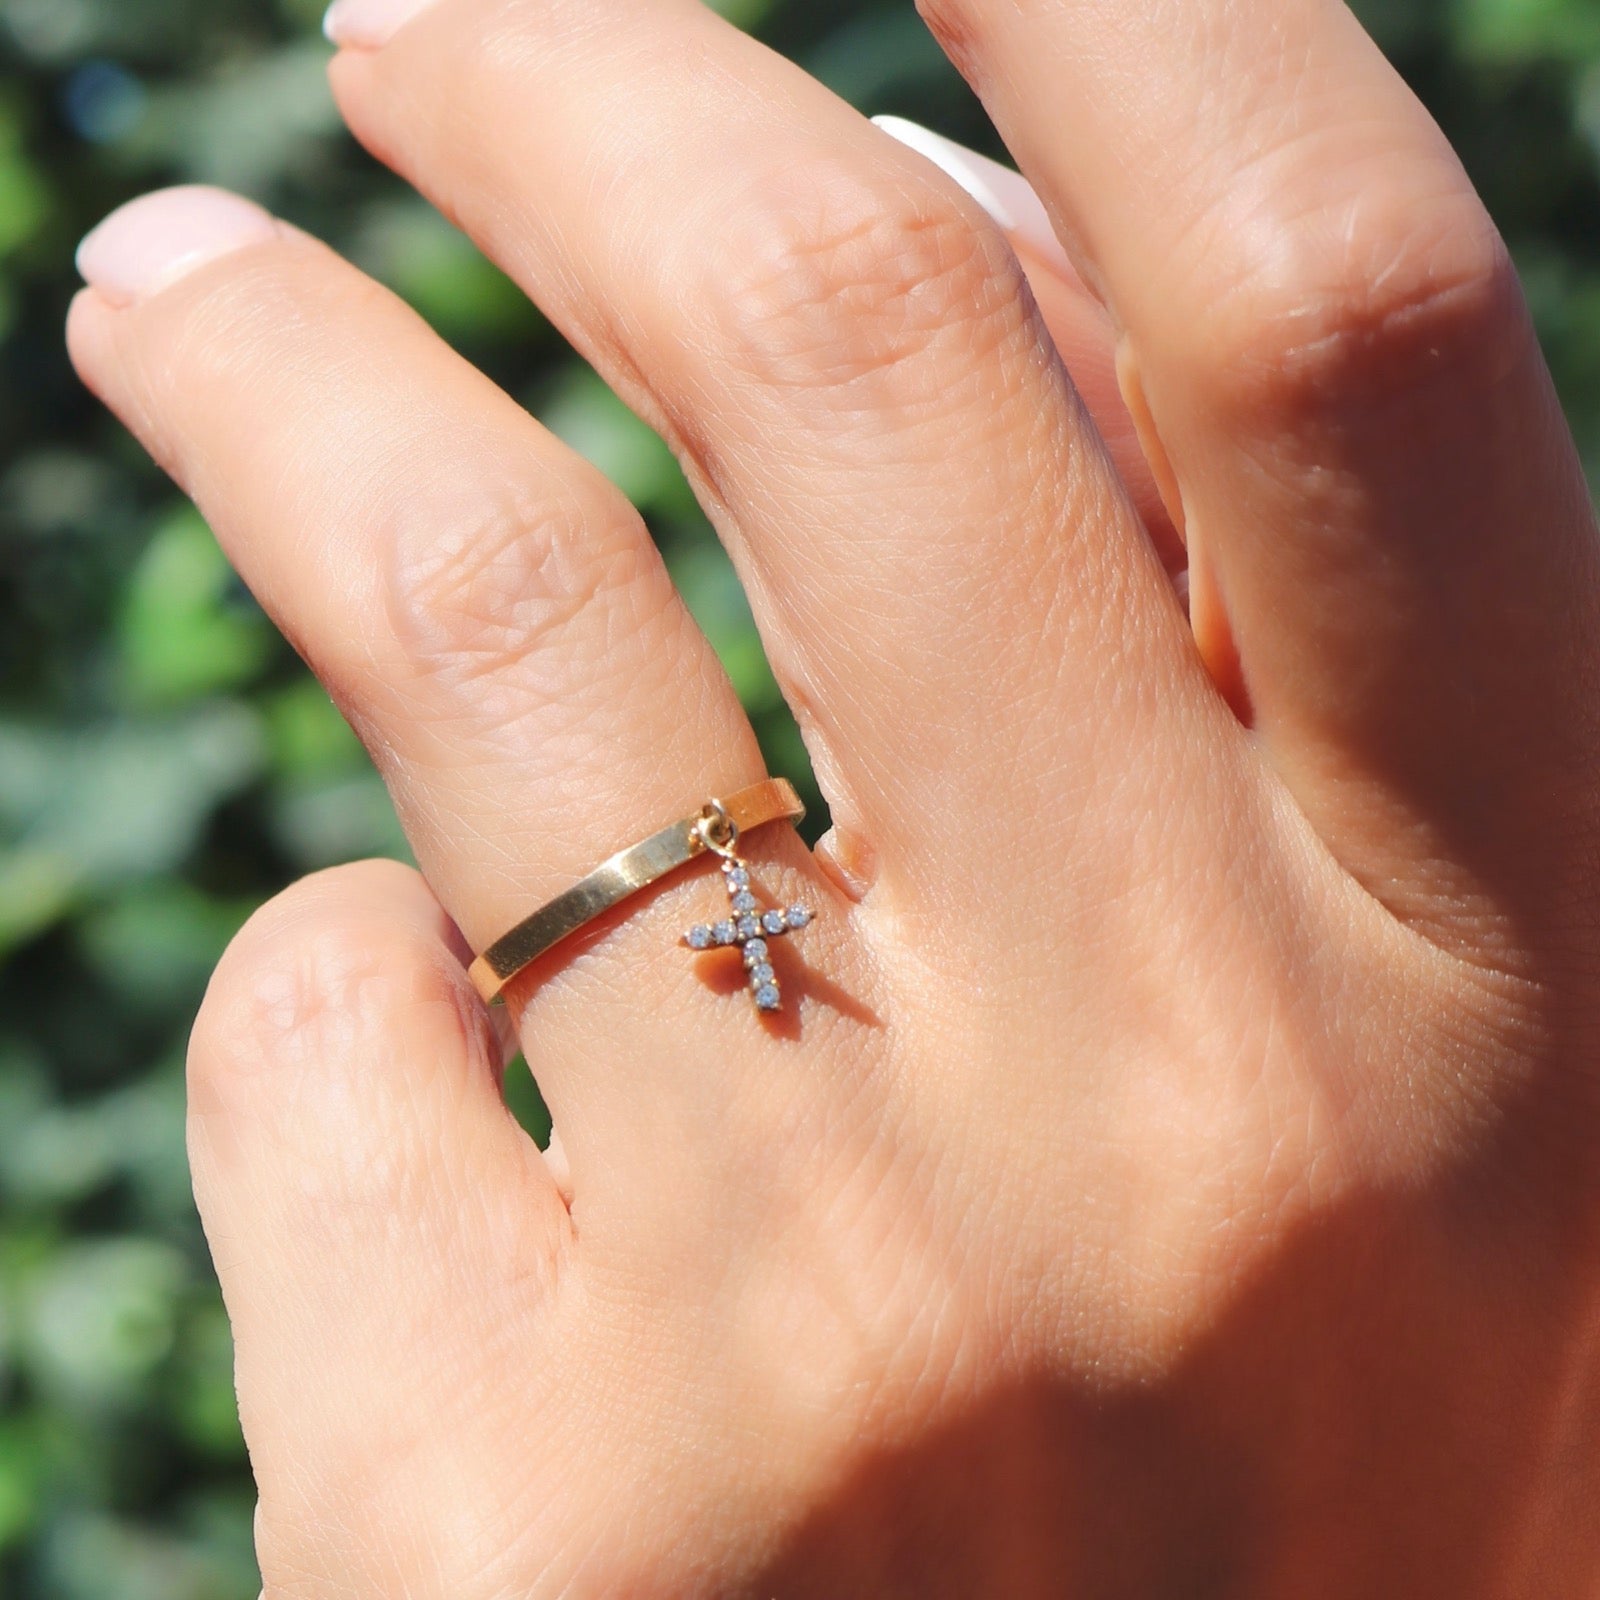 Vermeil & Sterling Silver Cross Charm Ring - Camille Jewelry